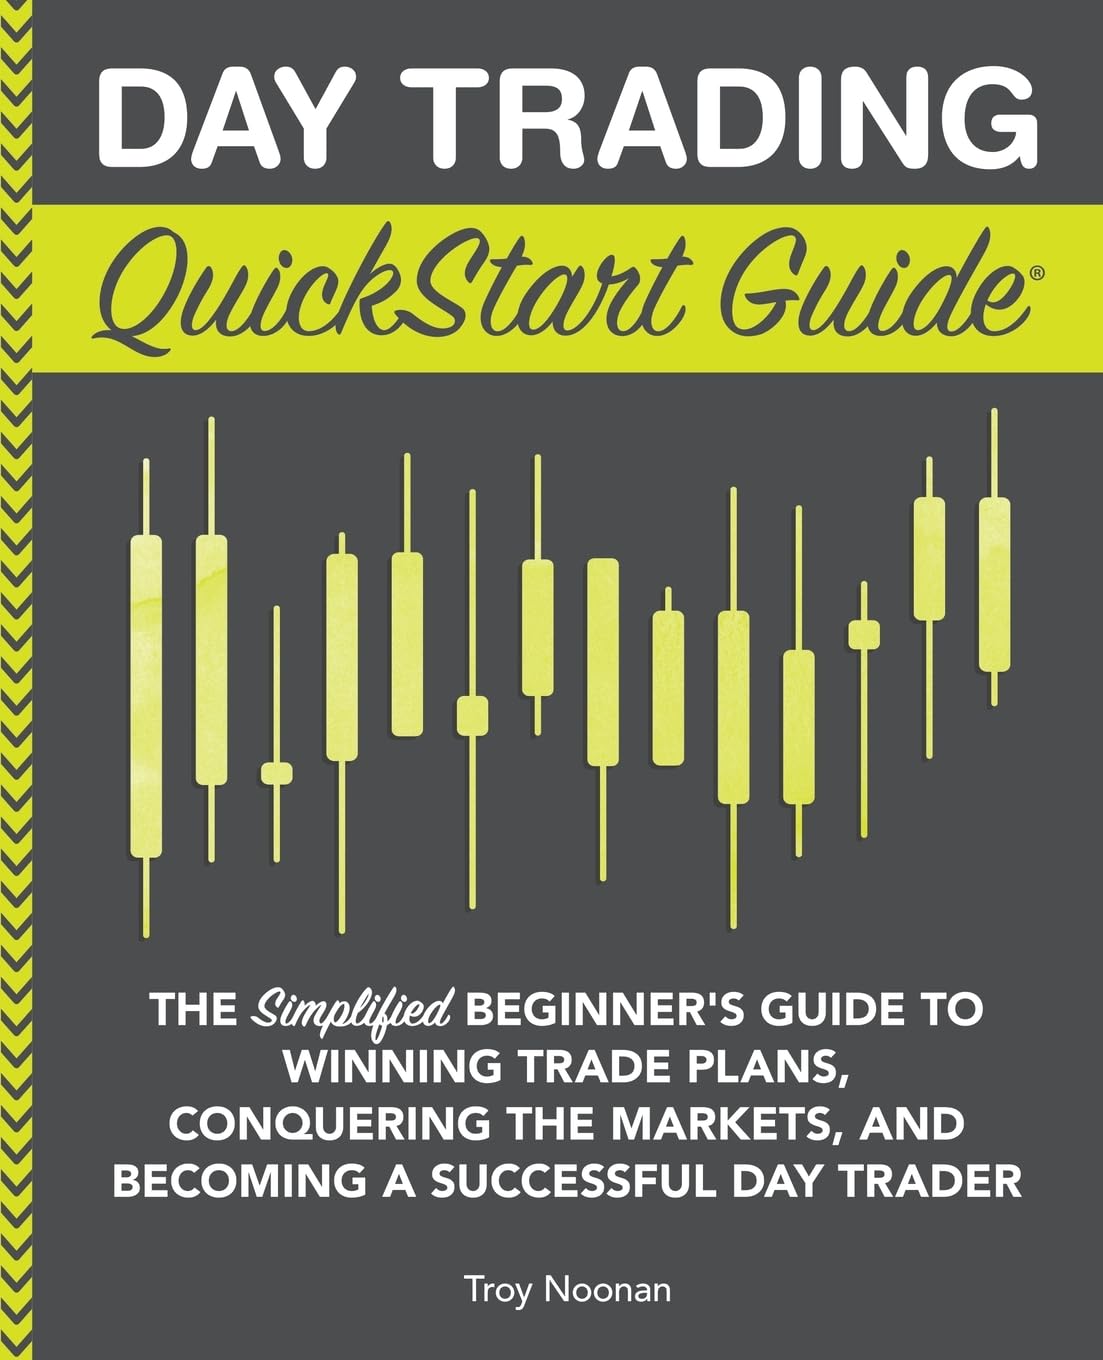 Day Trading QuickStart Guide: The Simplified Beginner's Guide to Winning Trade Plans, Conquering the Markets, and Becoming a Successful Day Trader, by Troy Noonan